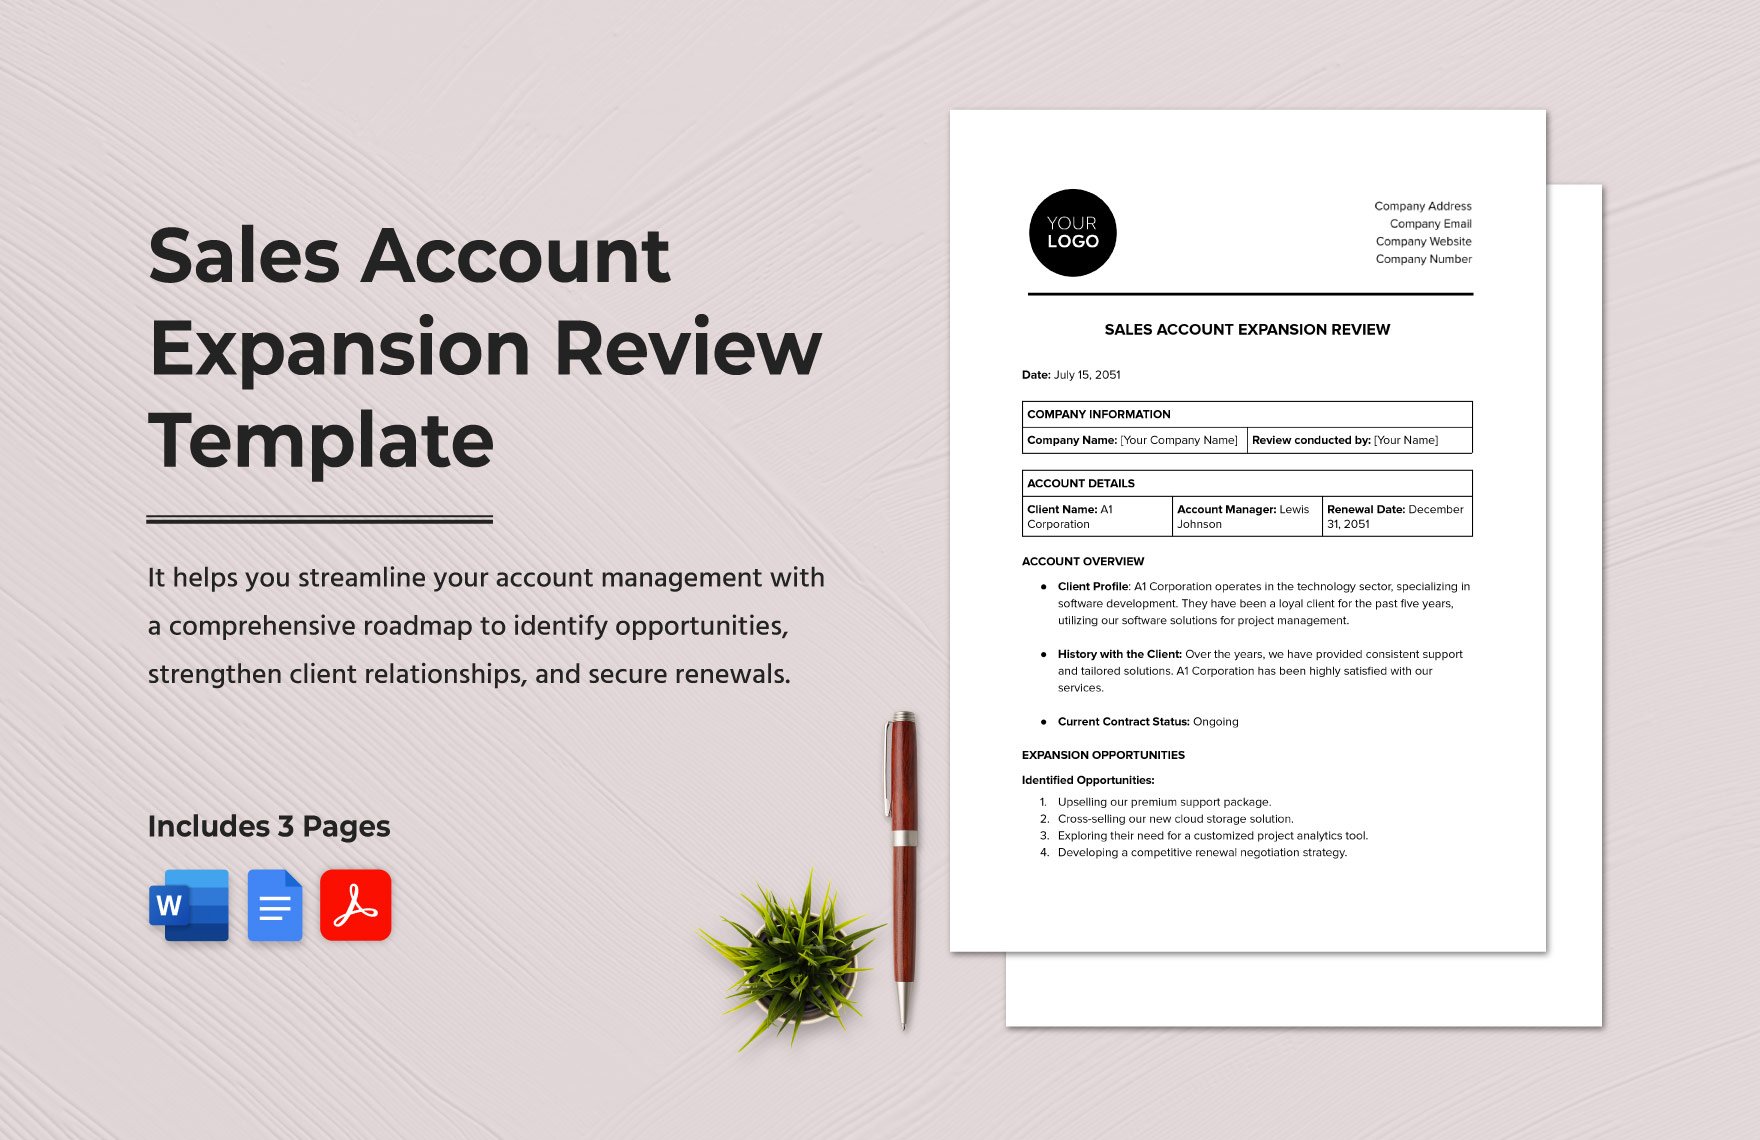 Sales Account Expansion Review Template in Word, Google Docs, PDF